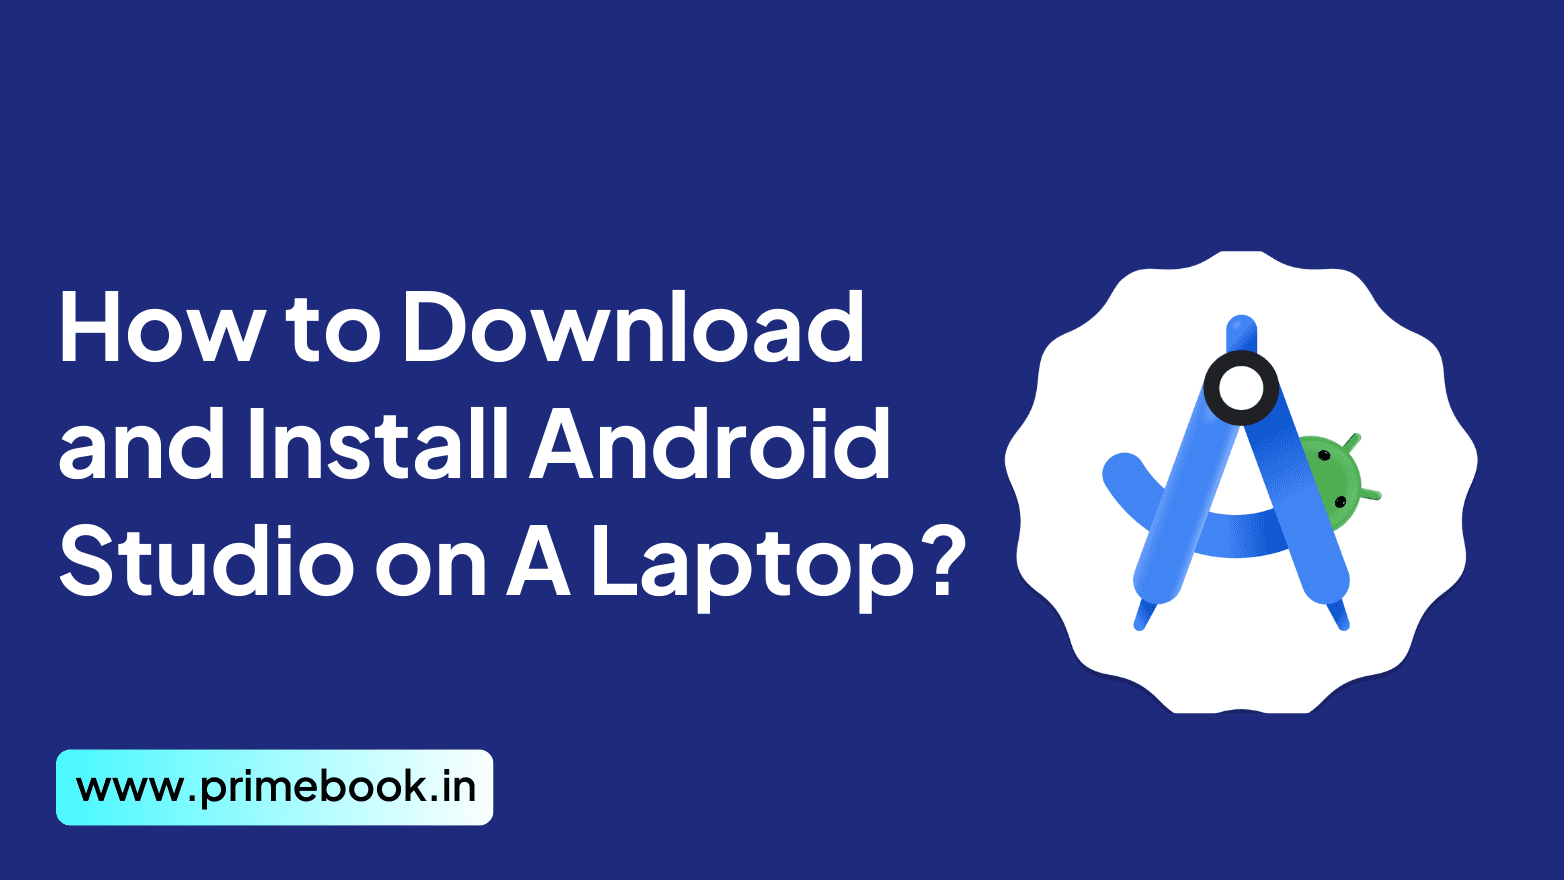 How to Download Android Studio and Install?